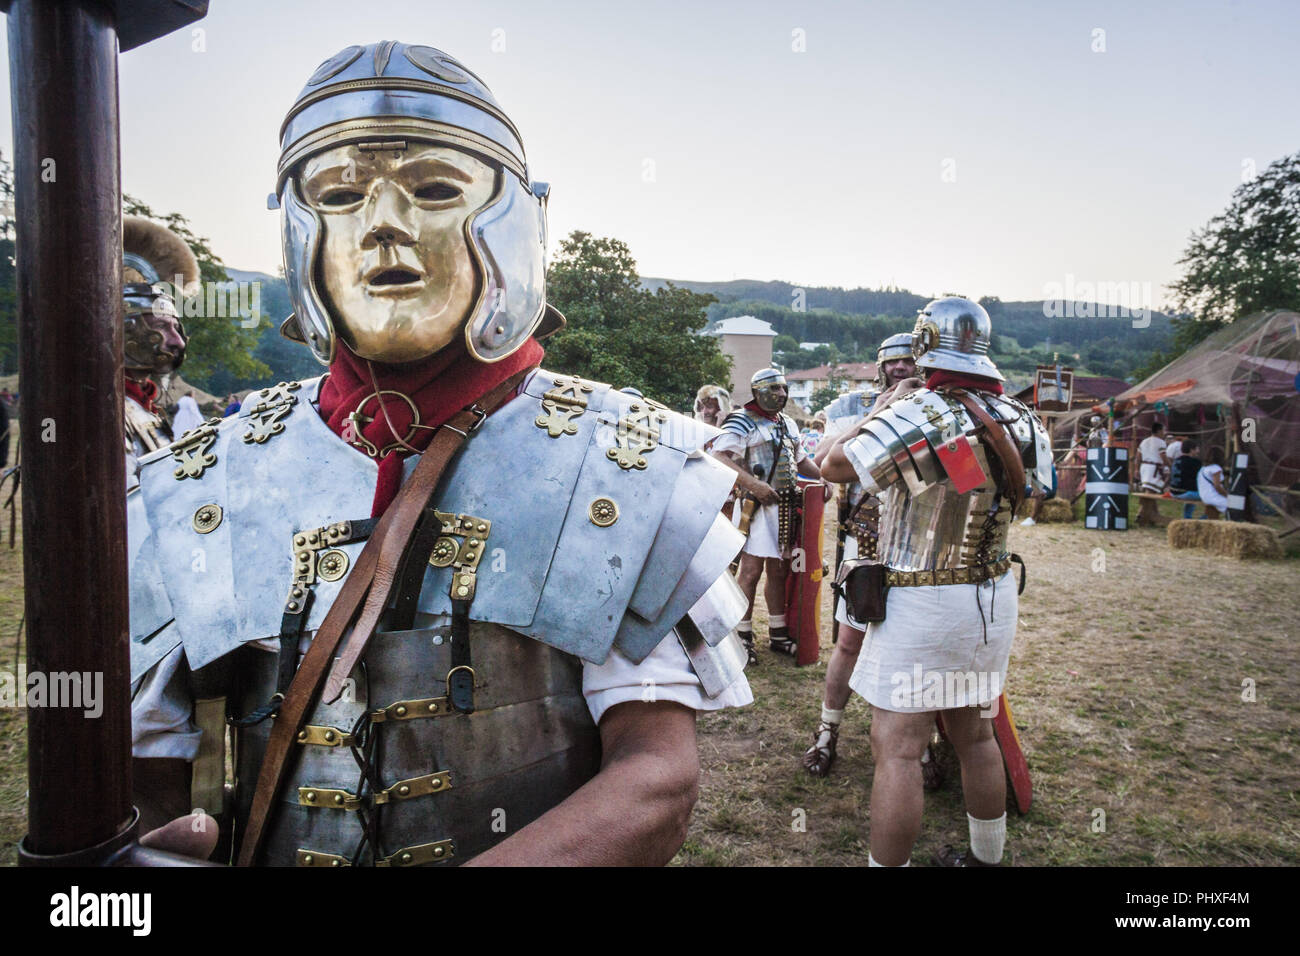 Los Corrales De Buelna, Cantabria, Spain. 1st Sep, 2018. Man with ancient  roman soldier costumes during the celebrations of the recreation of the  cantabrian wars in Los Corrales de Buelna, Spain. Credit: